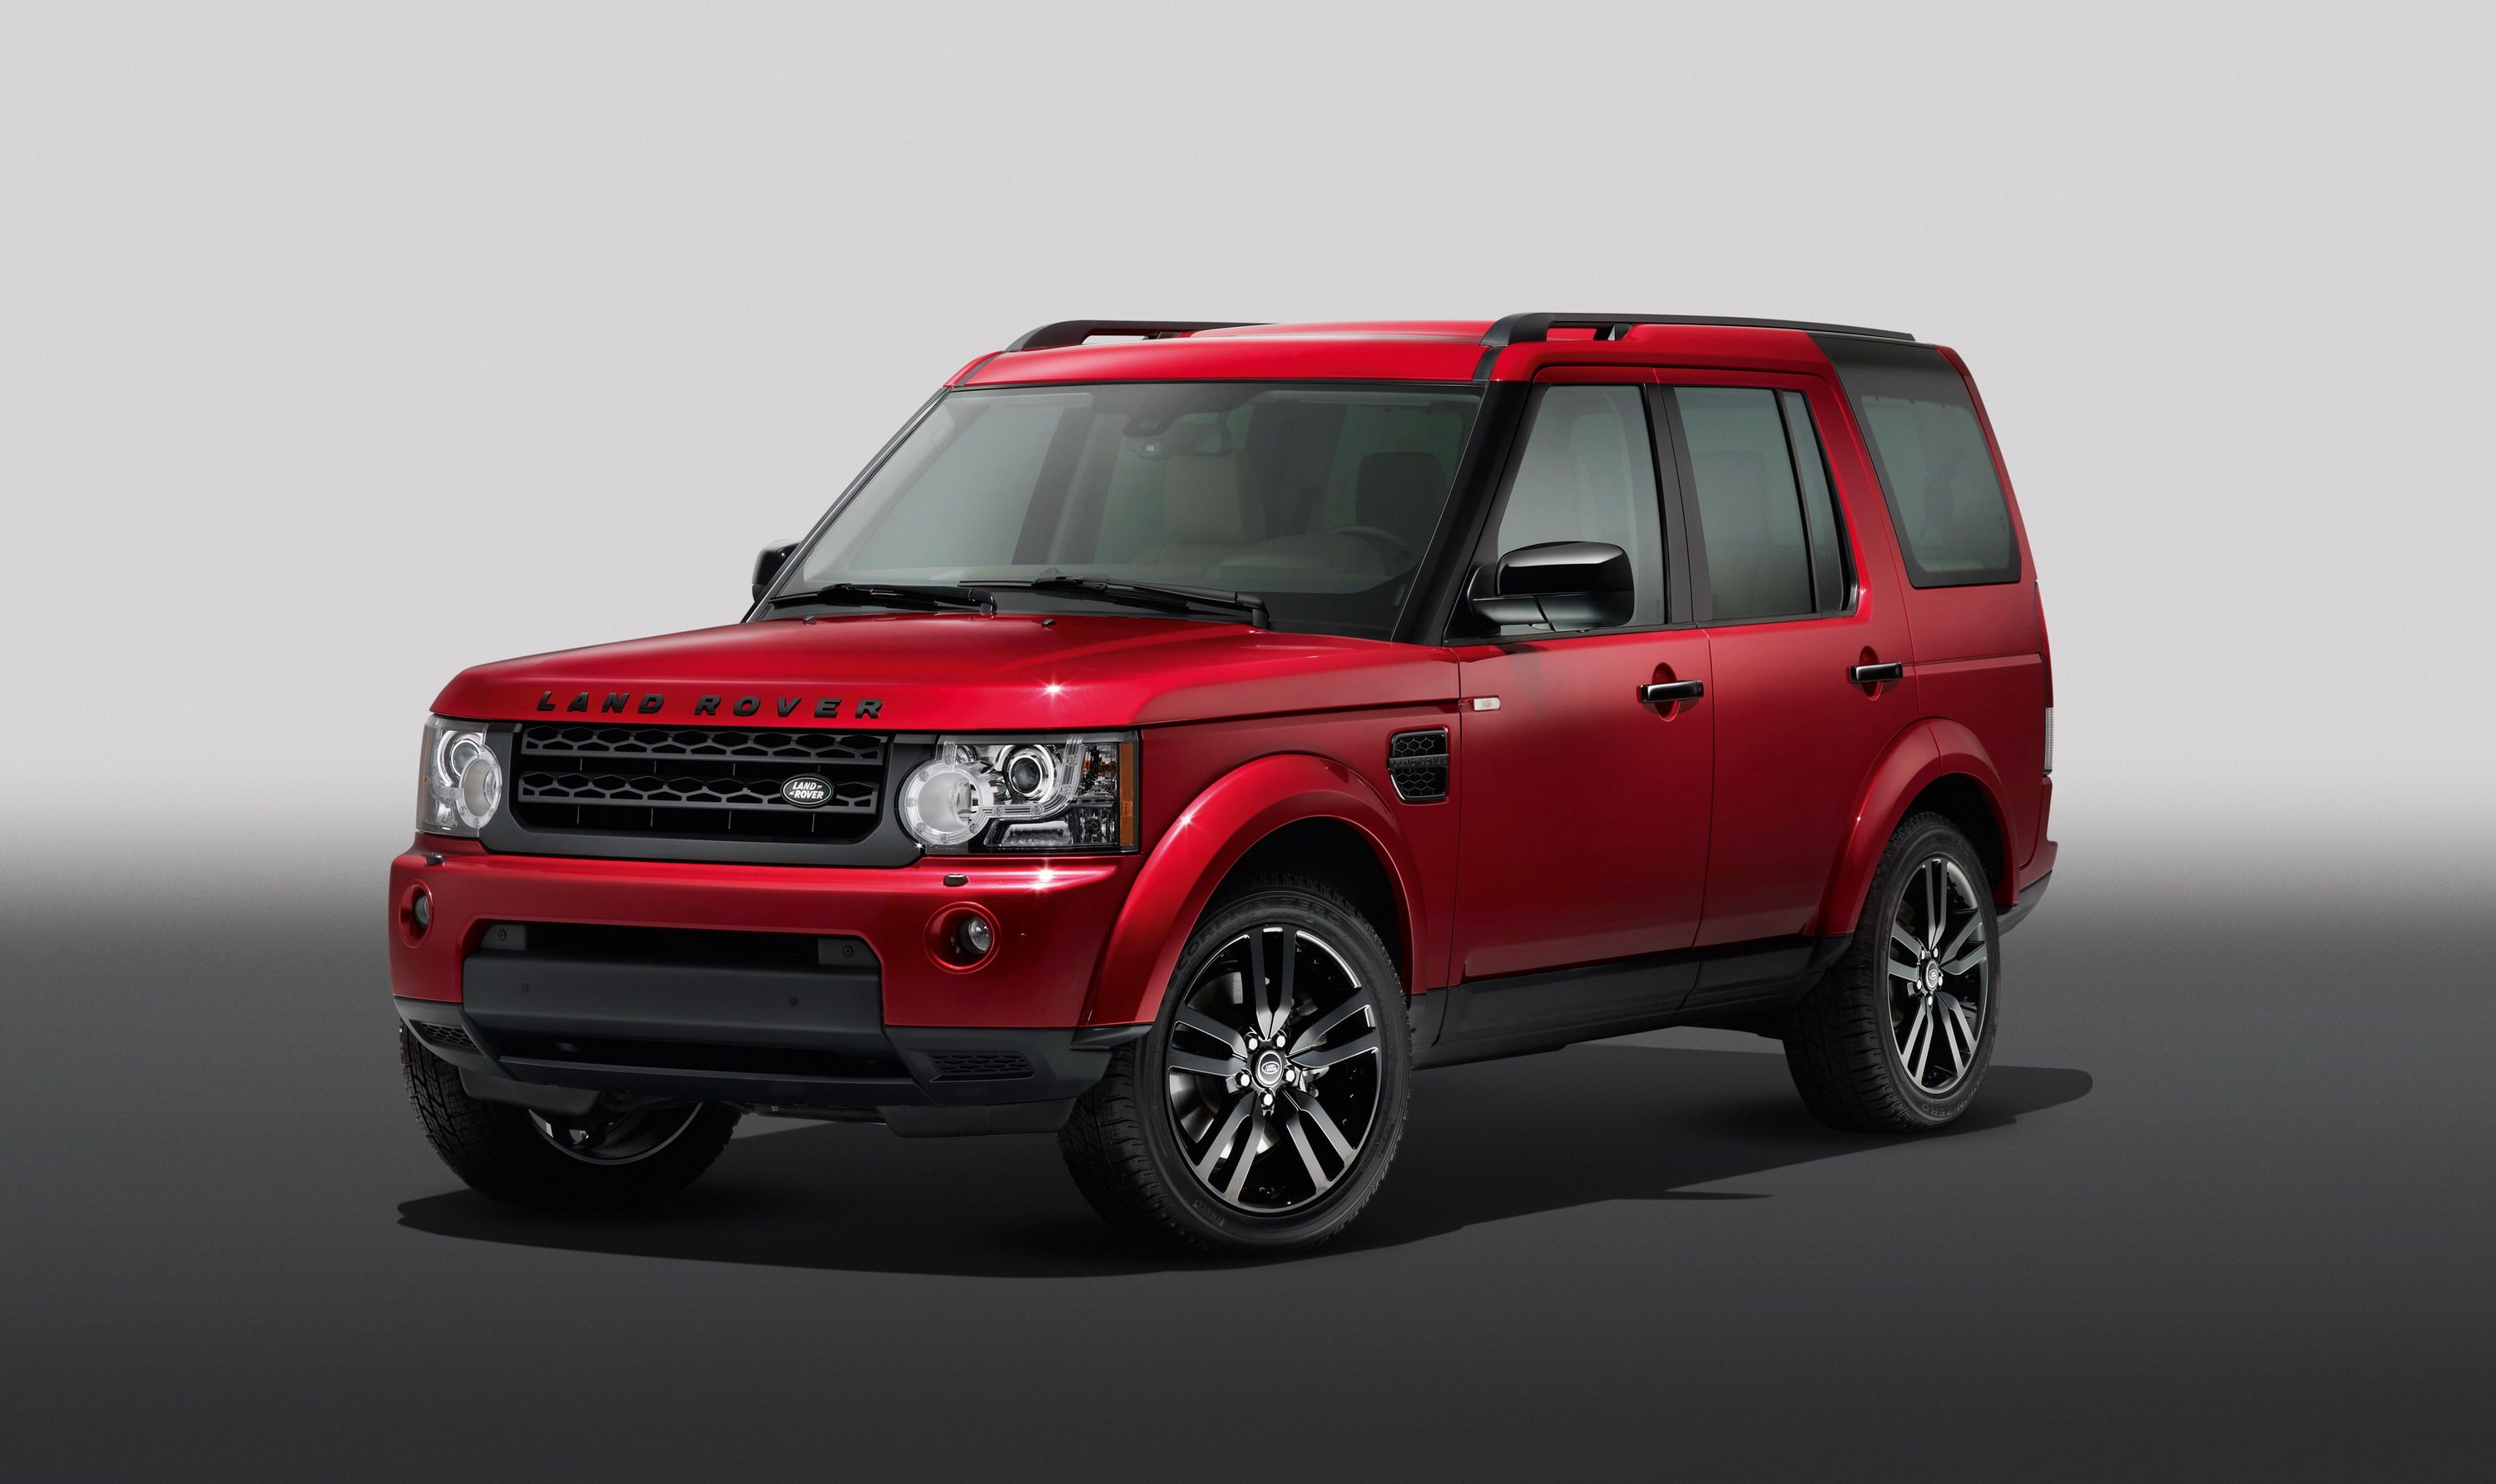 2013 Land Rover Discovery 4 Black Design Packs 